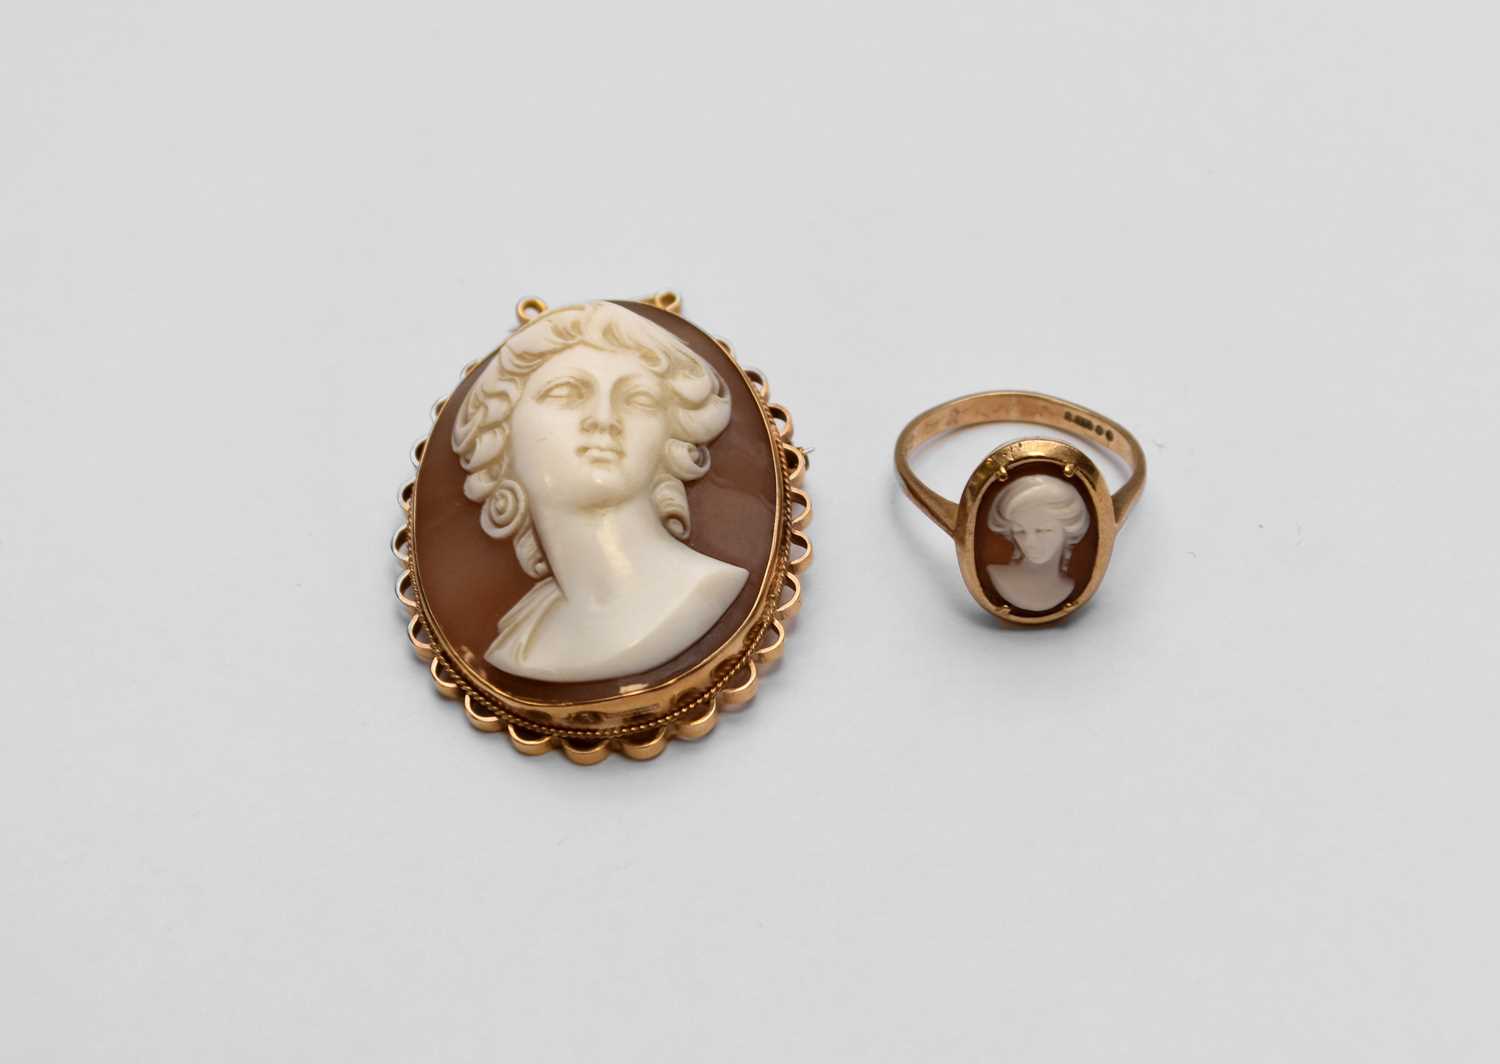 A cameo brooch and a cameo ring